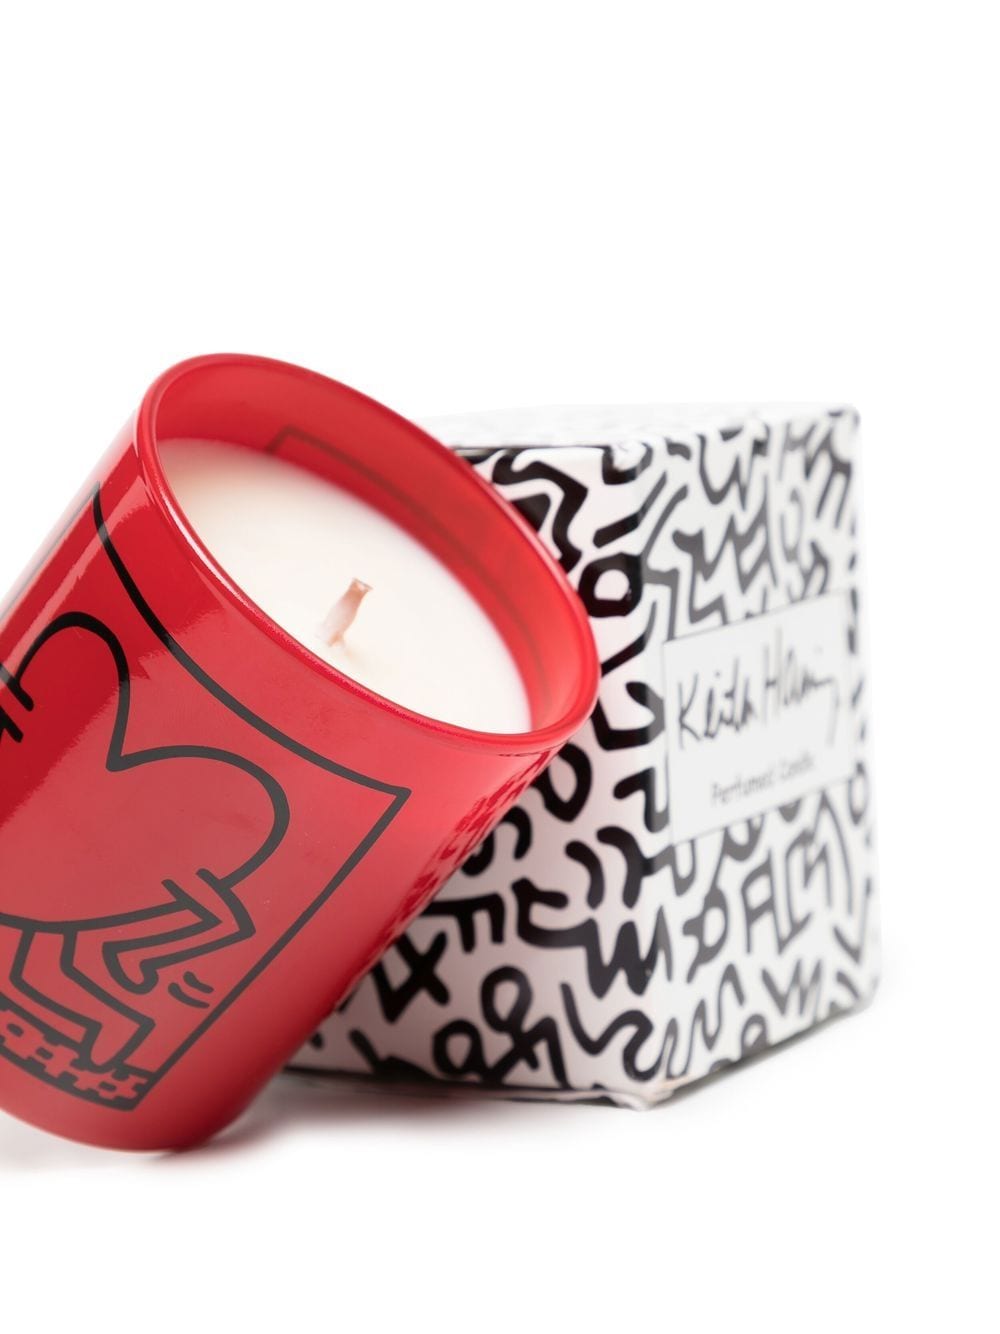 Shop Ligne Blanche Keith Haring Running Heart Candle